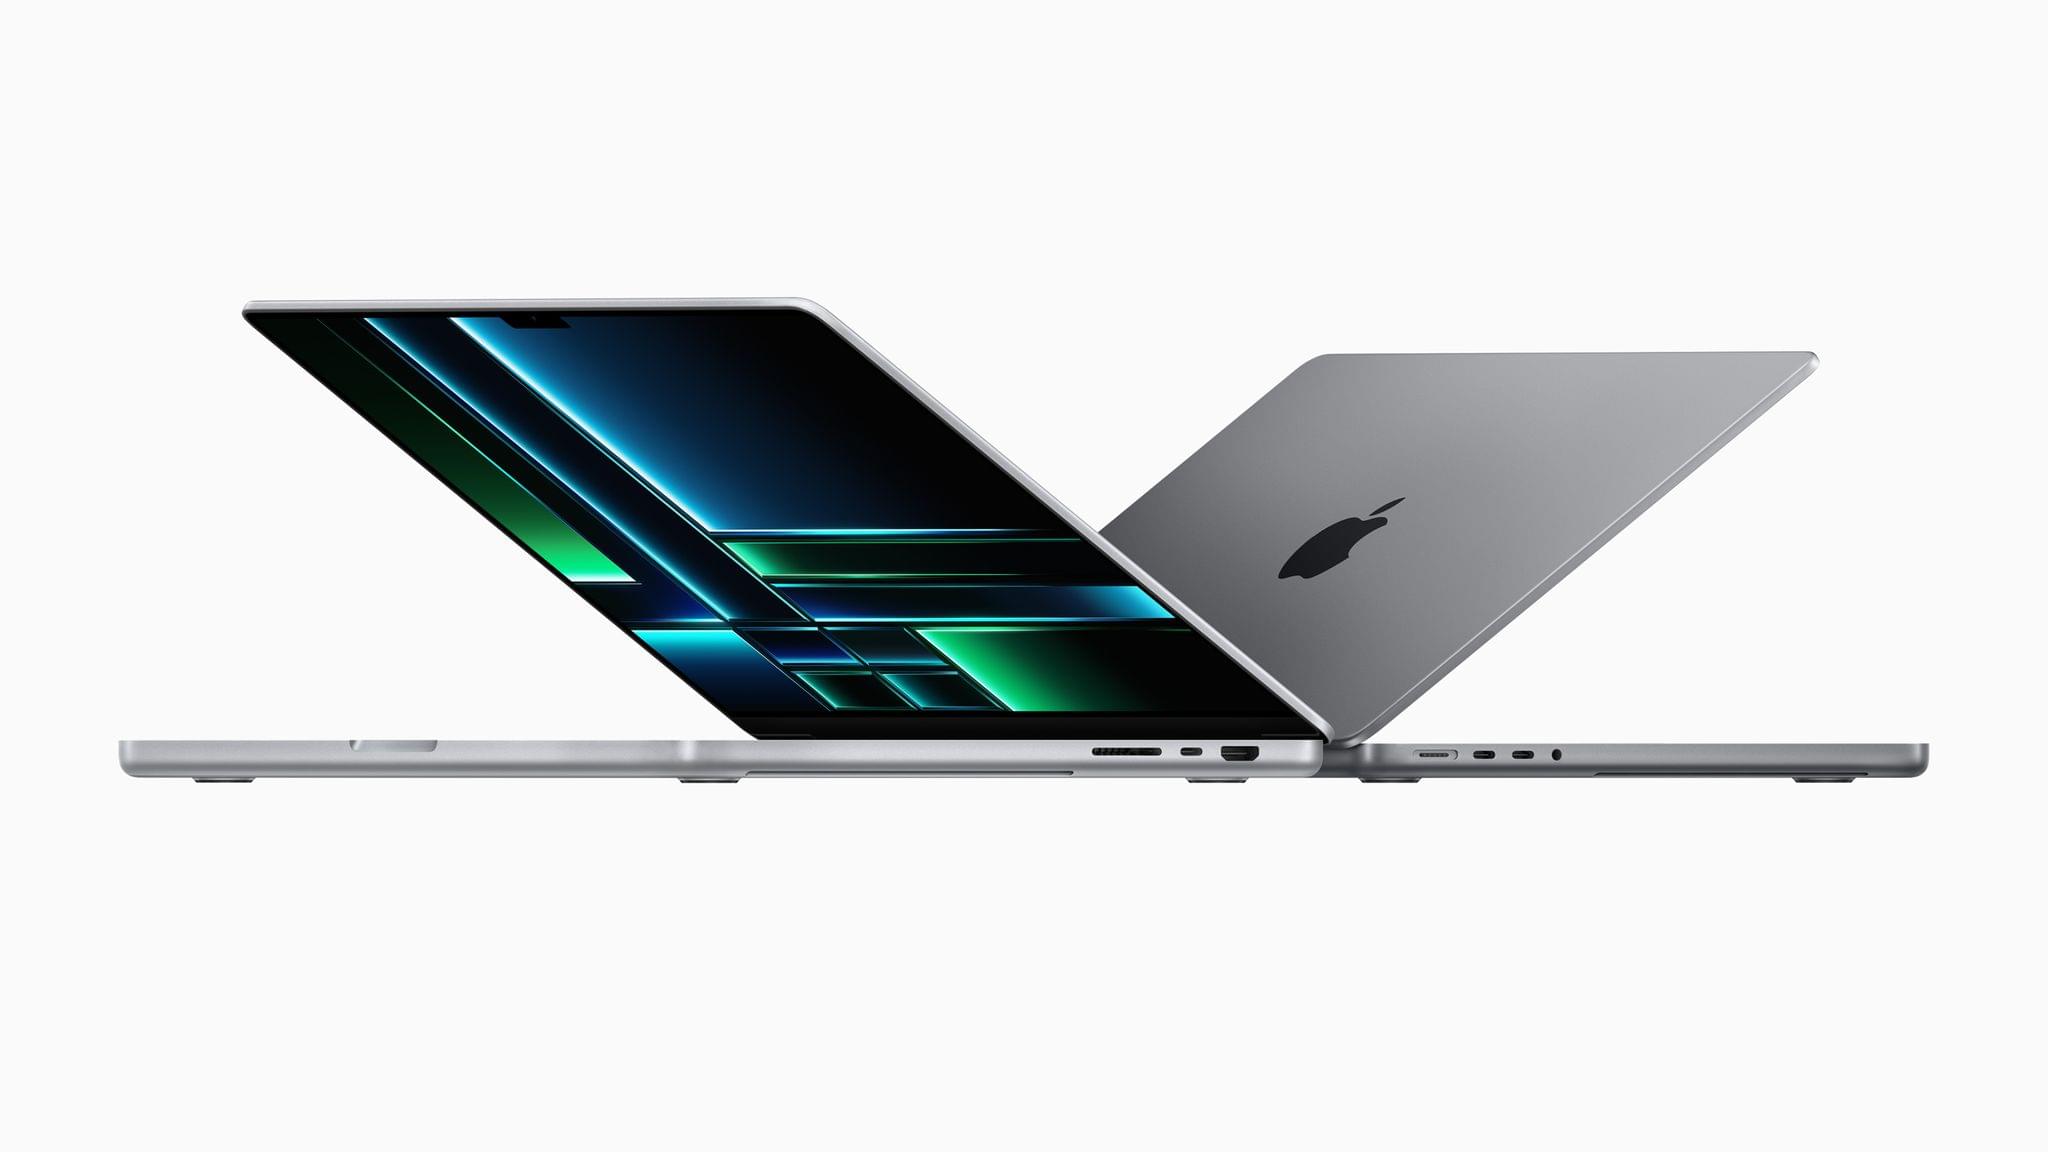 The M2 Max MacBook Pros have potential as gaming laptops if developers transmute their games for the system.